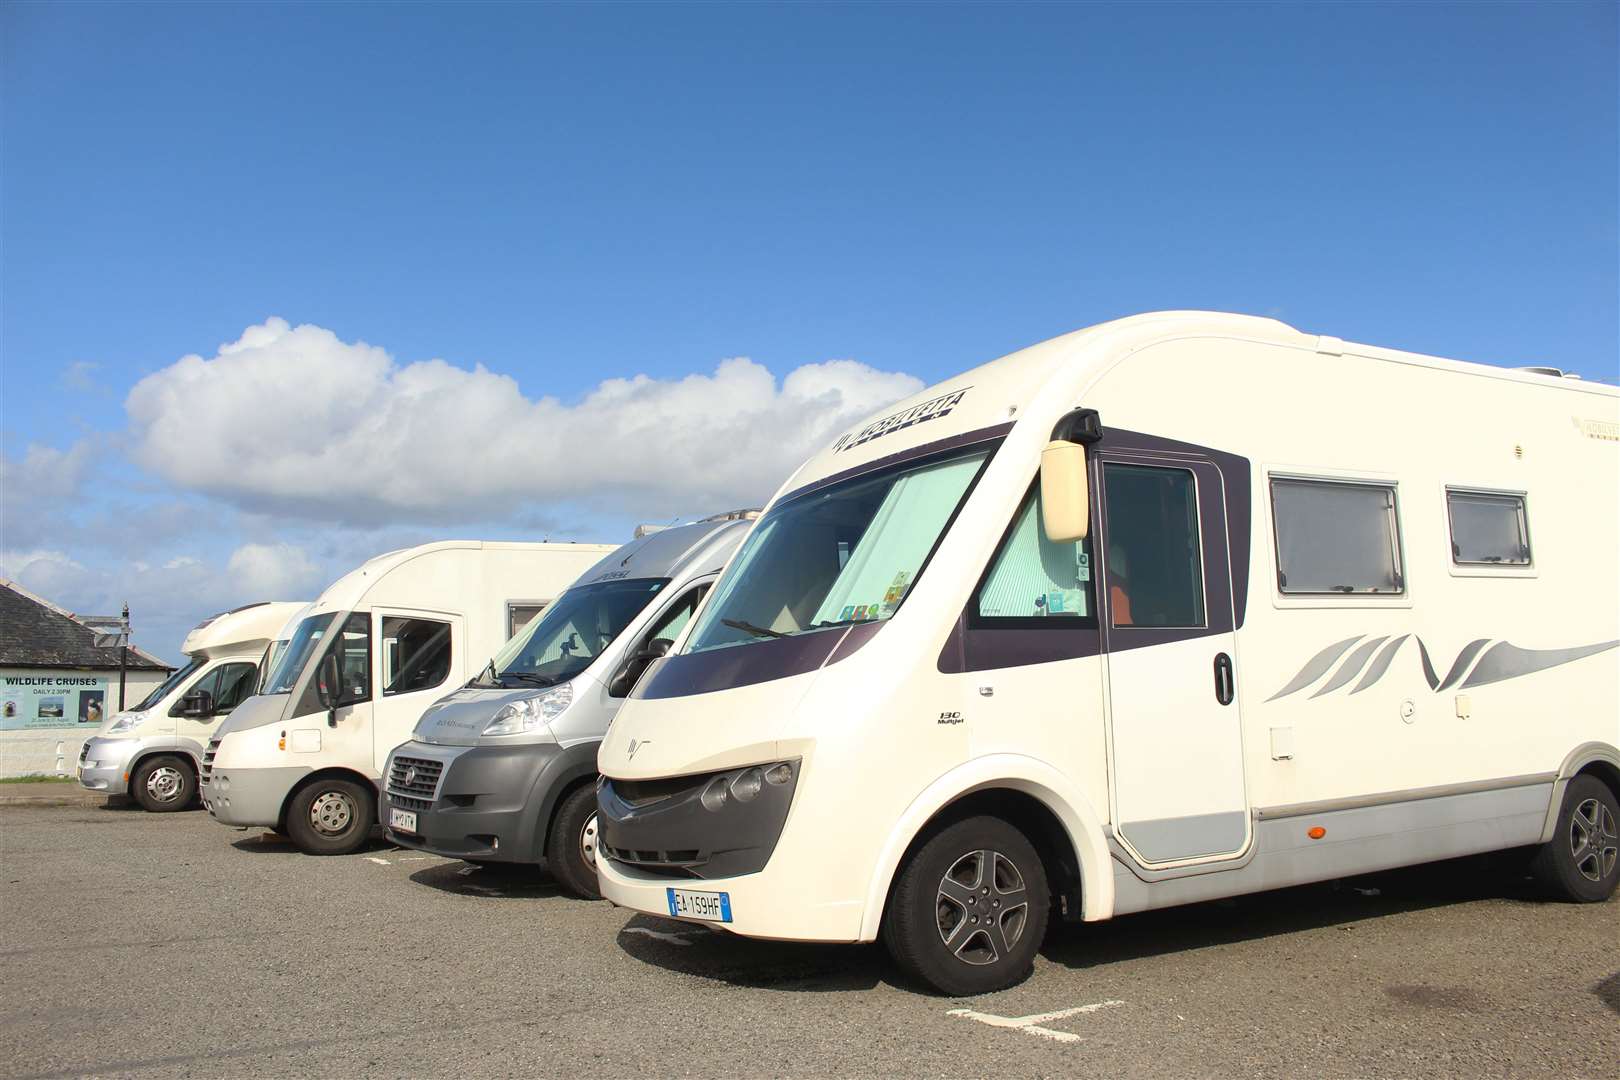 Concerns have been raised around the north of Scotland about some motorhome users as well as speeding vehicles.